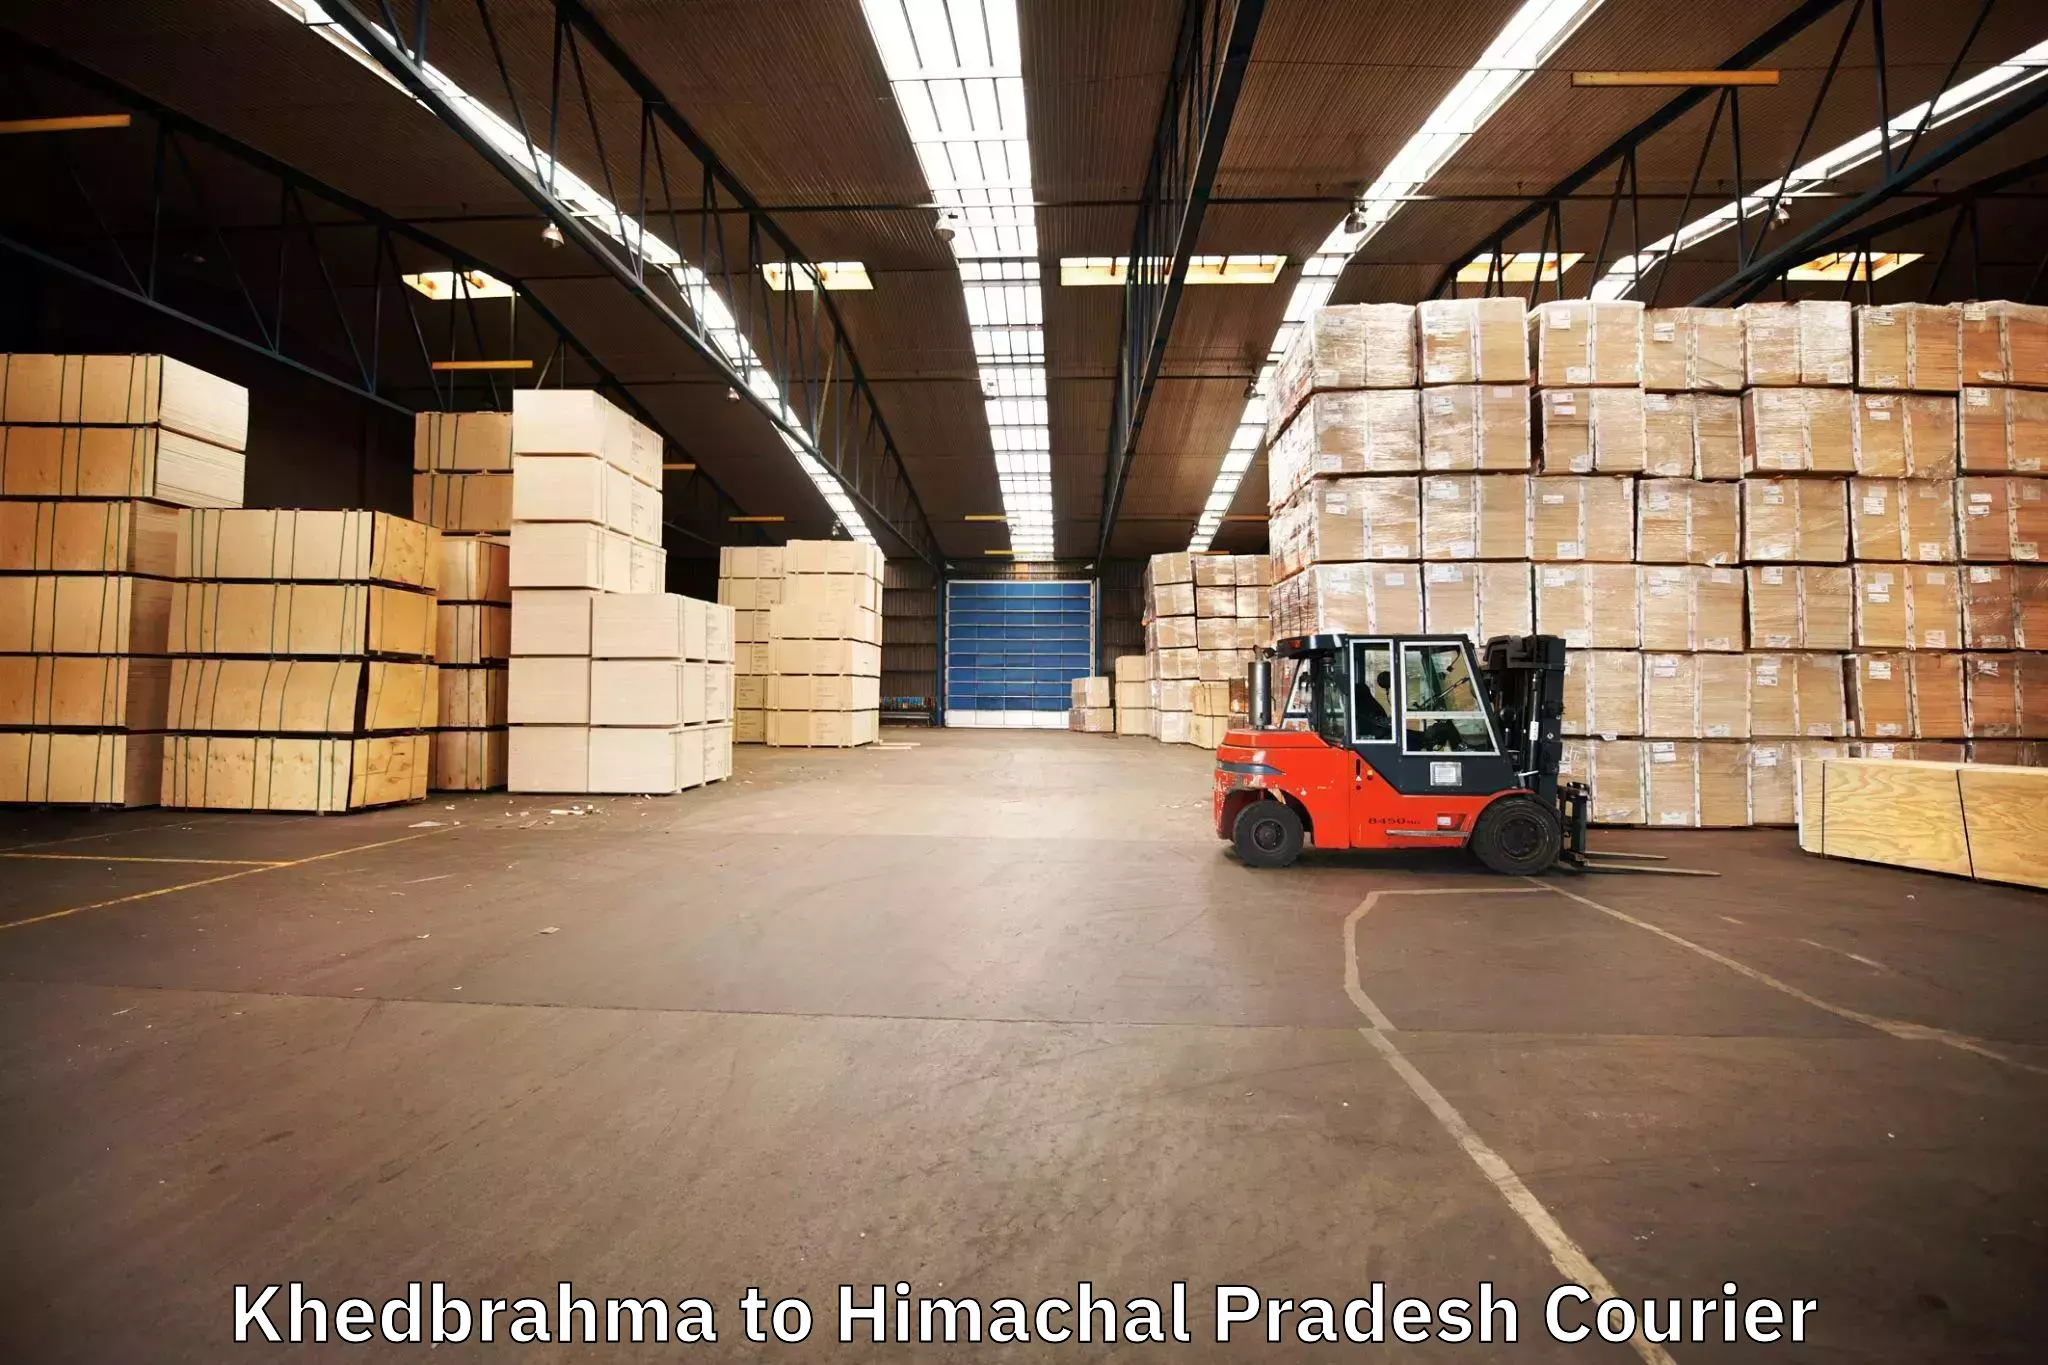 Moving and handling services Khedbrahma to Dheera